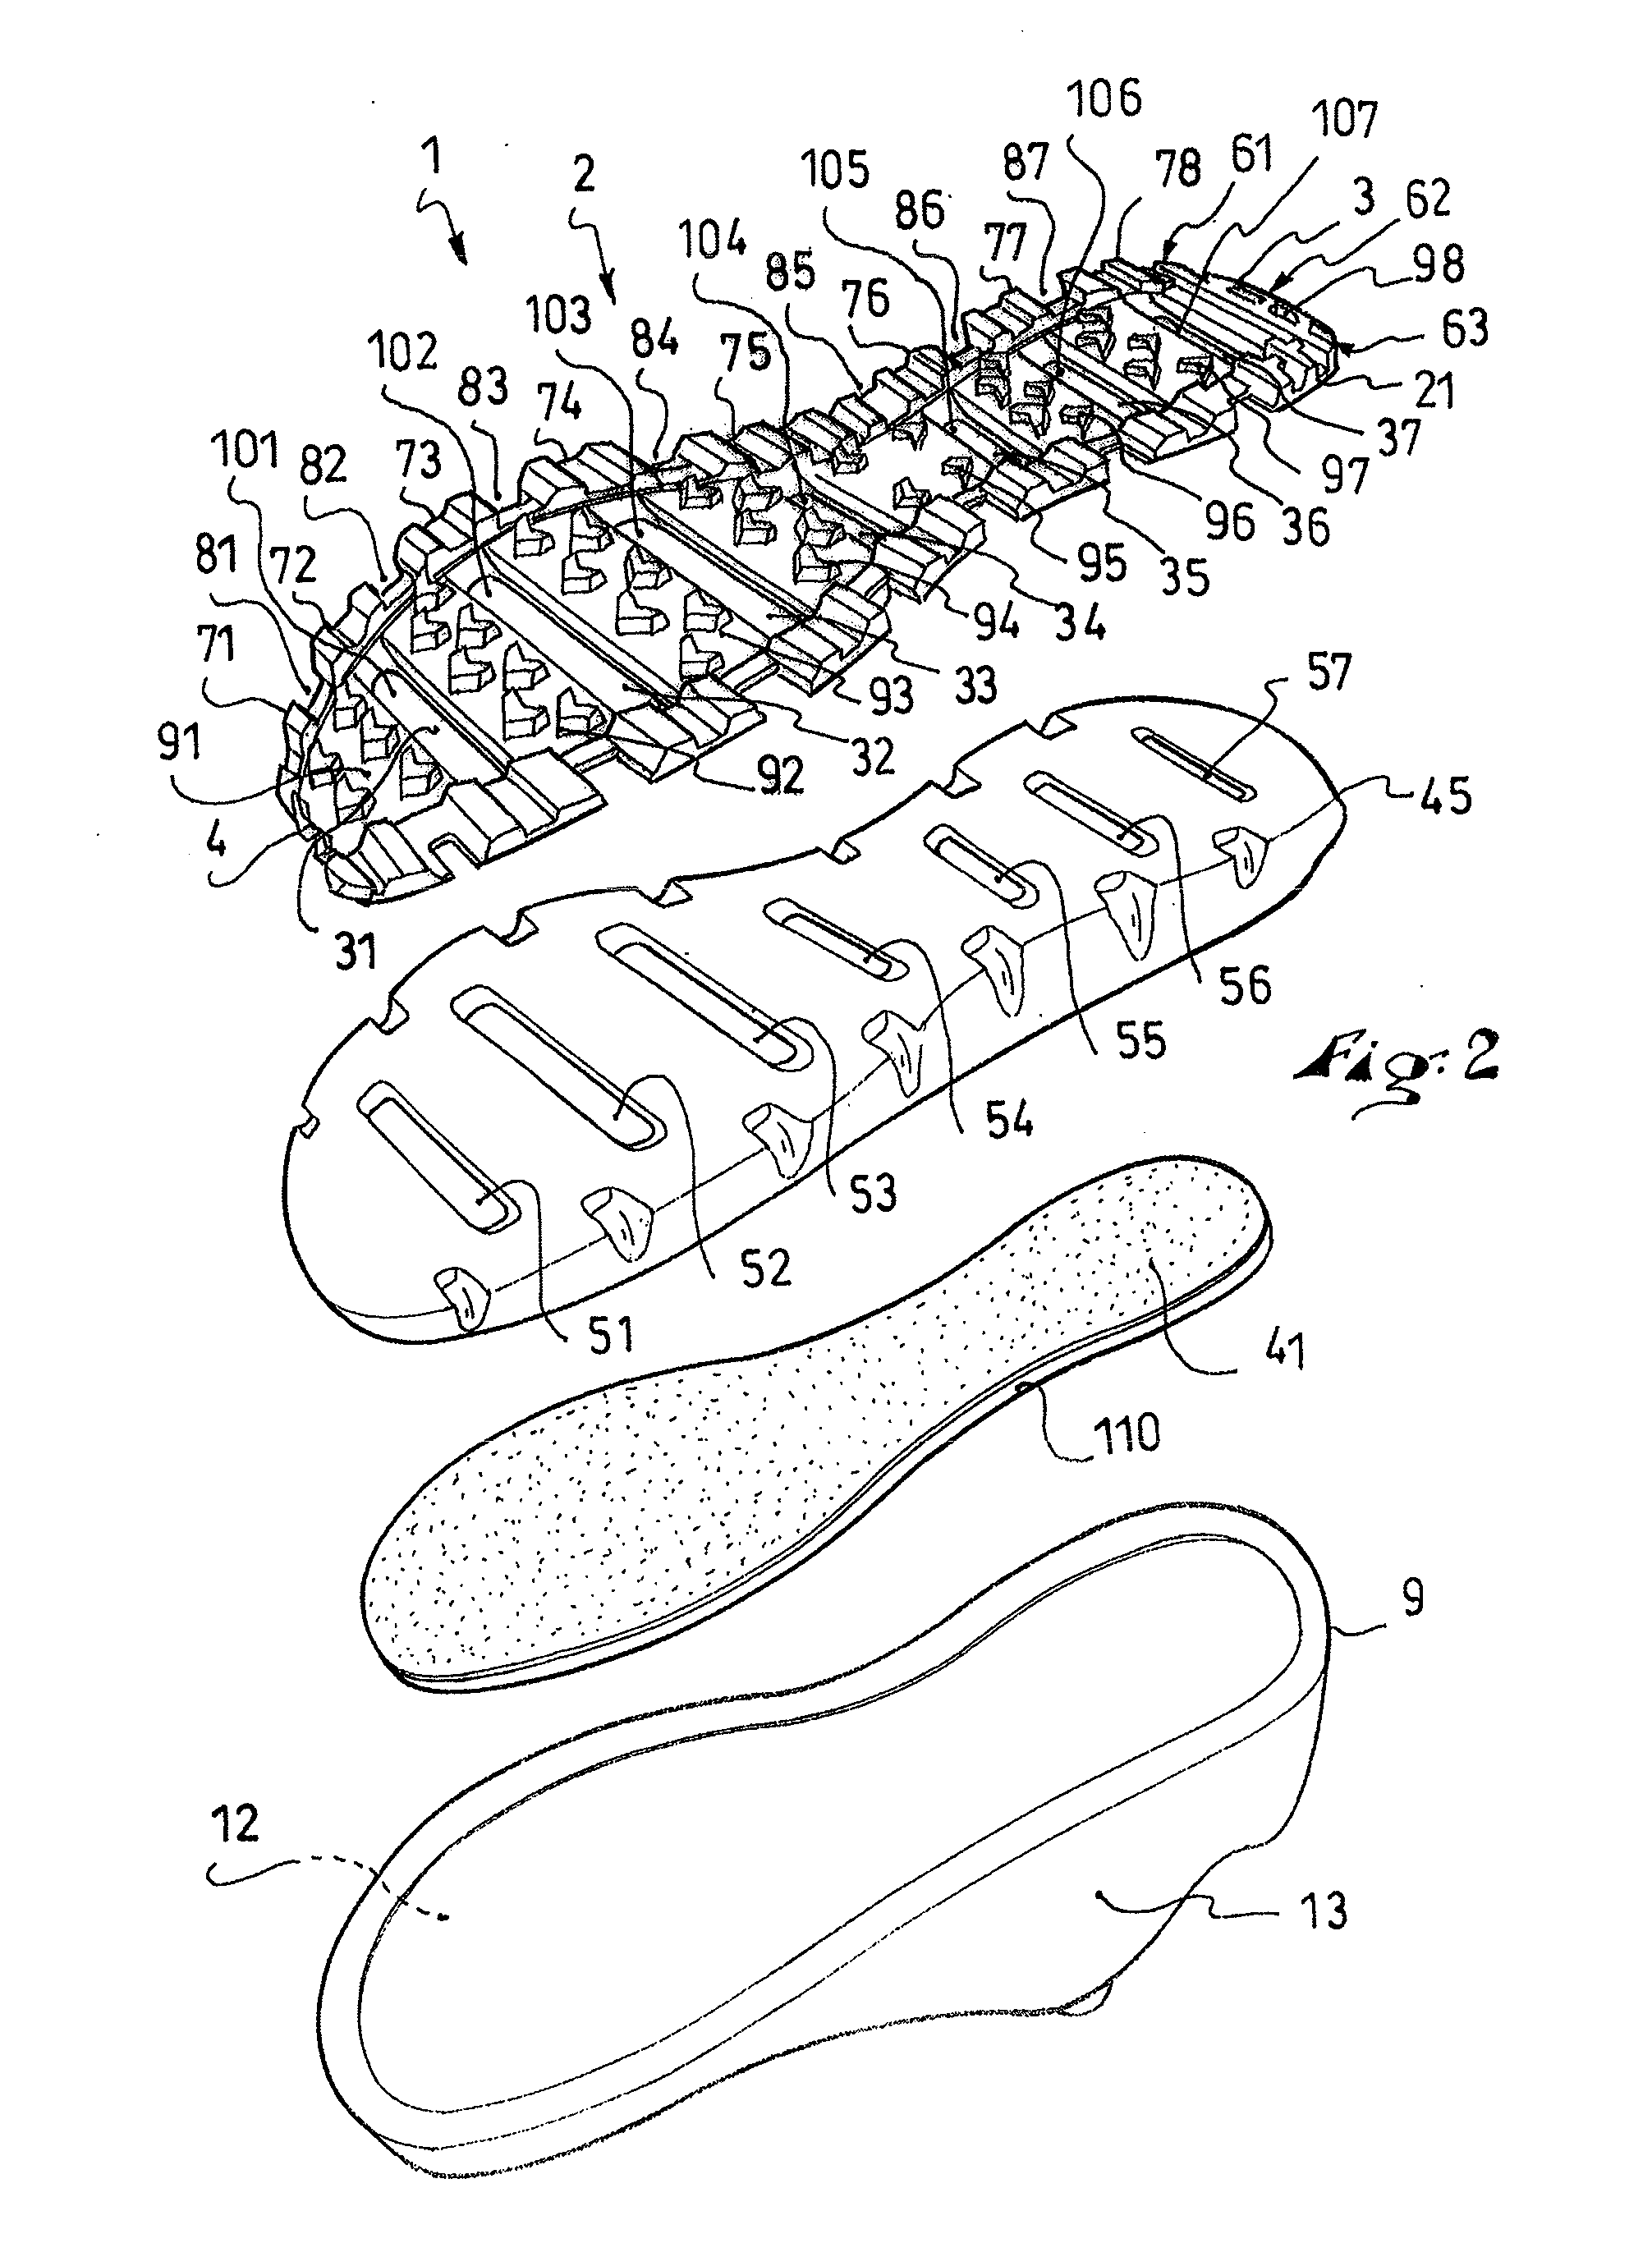 Footwear with improved sole assembly